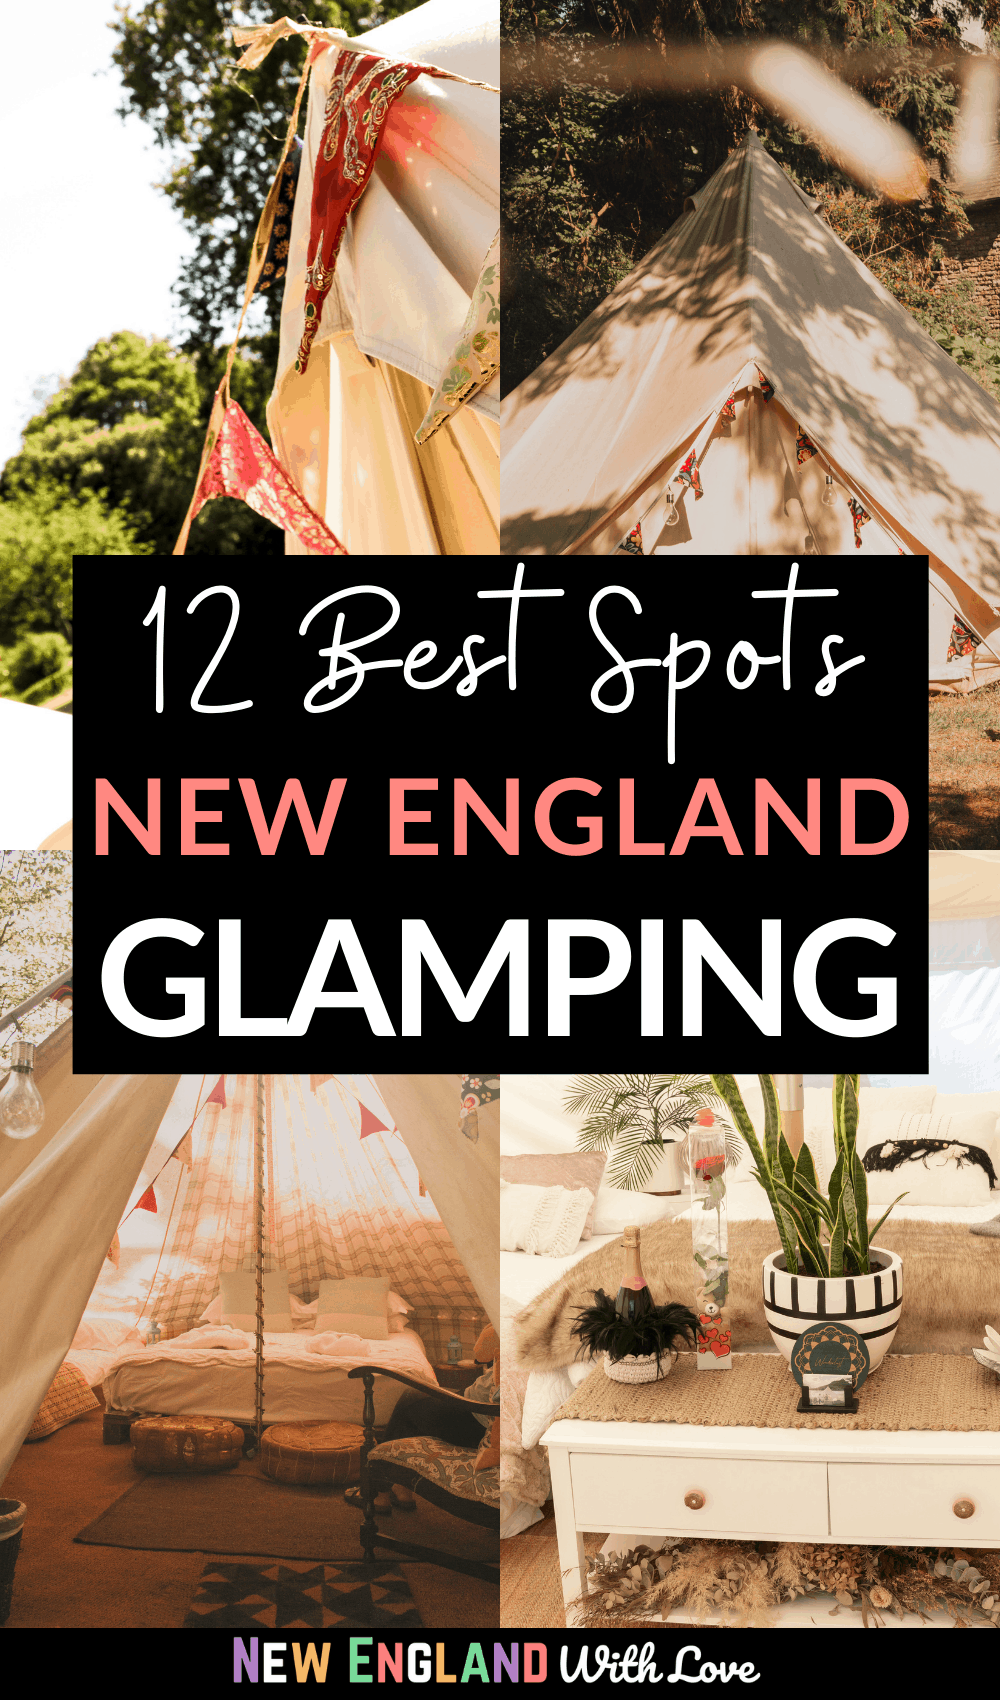 A Pinterest graphic reading "12 Best Spots NEW ENGLAND GLAMPING"